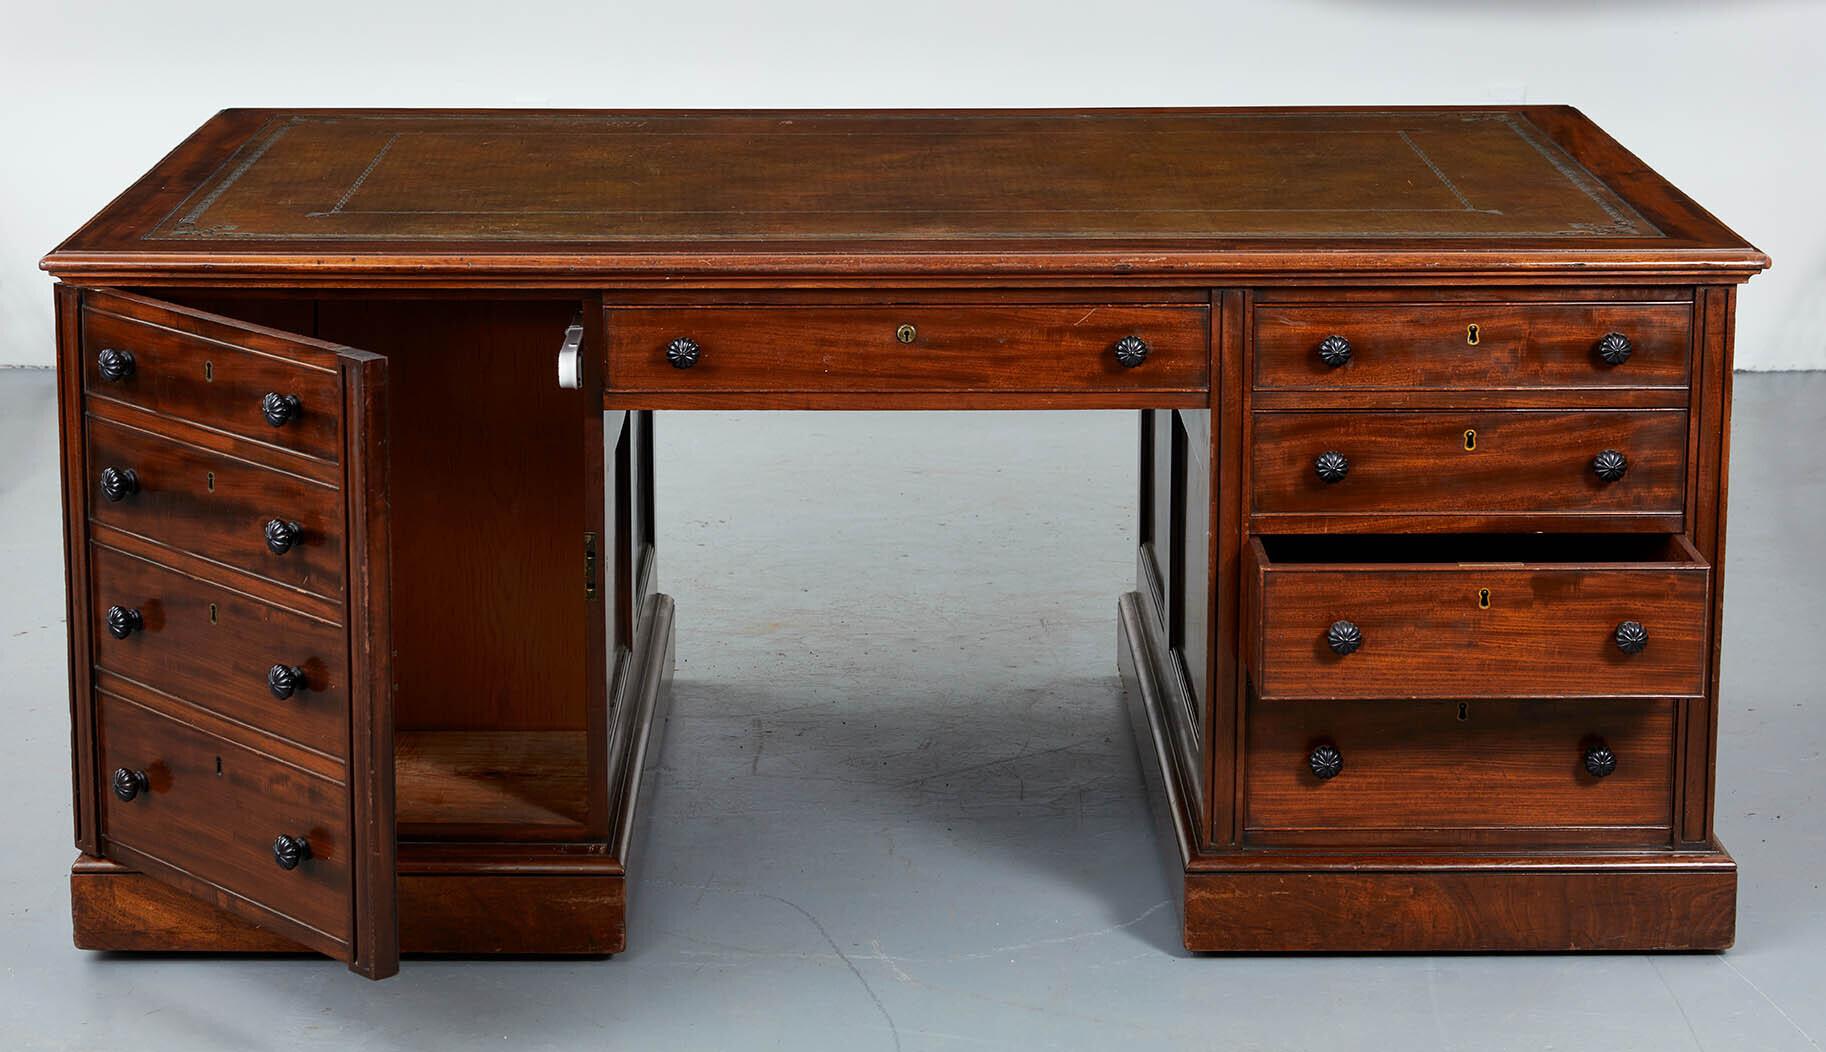 Early 19th Century Very Fine George IV Mahogany and Ebony Partners Desk by Gillows For Sale